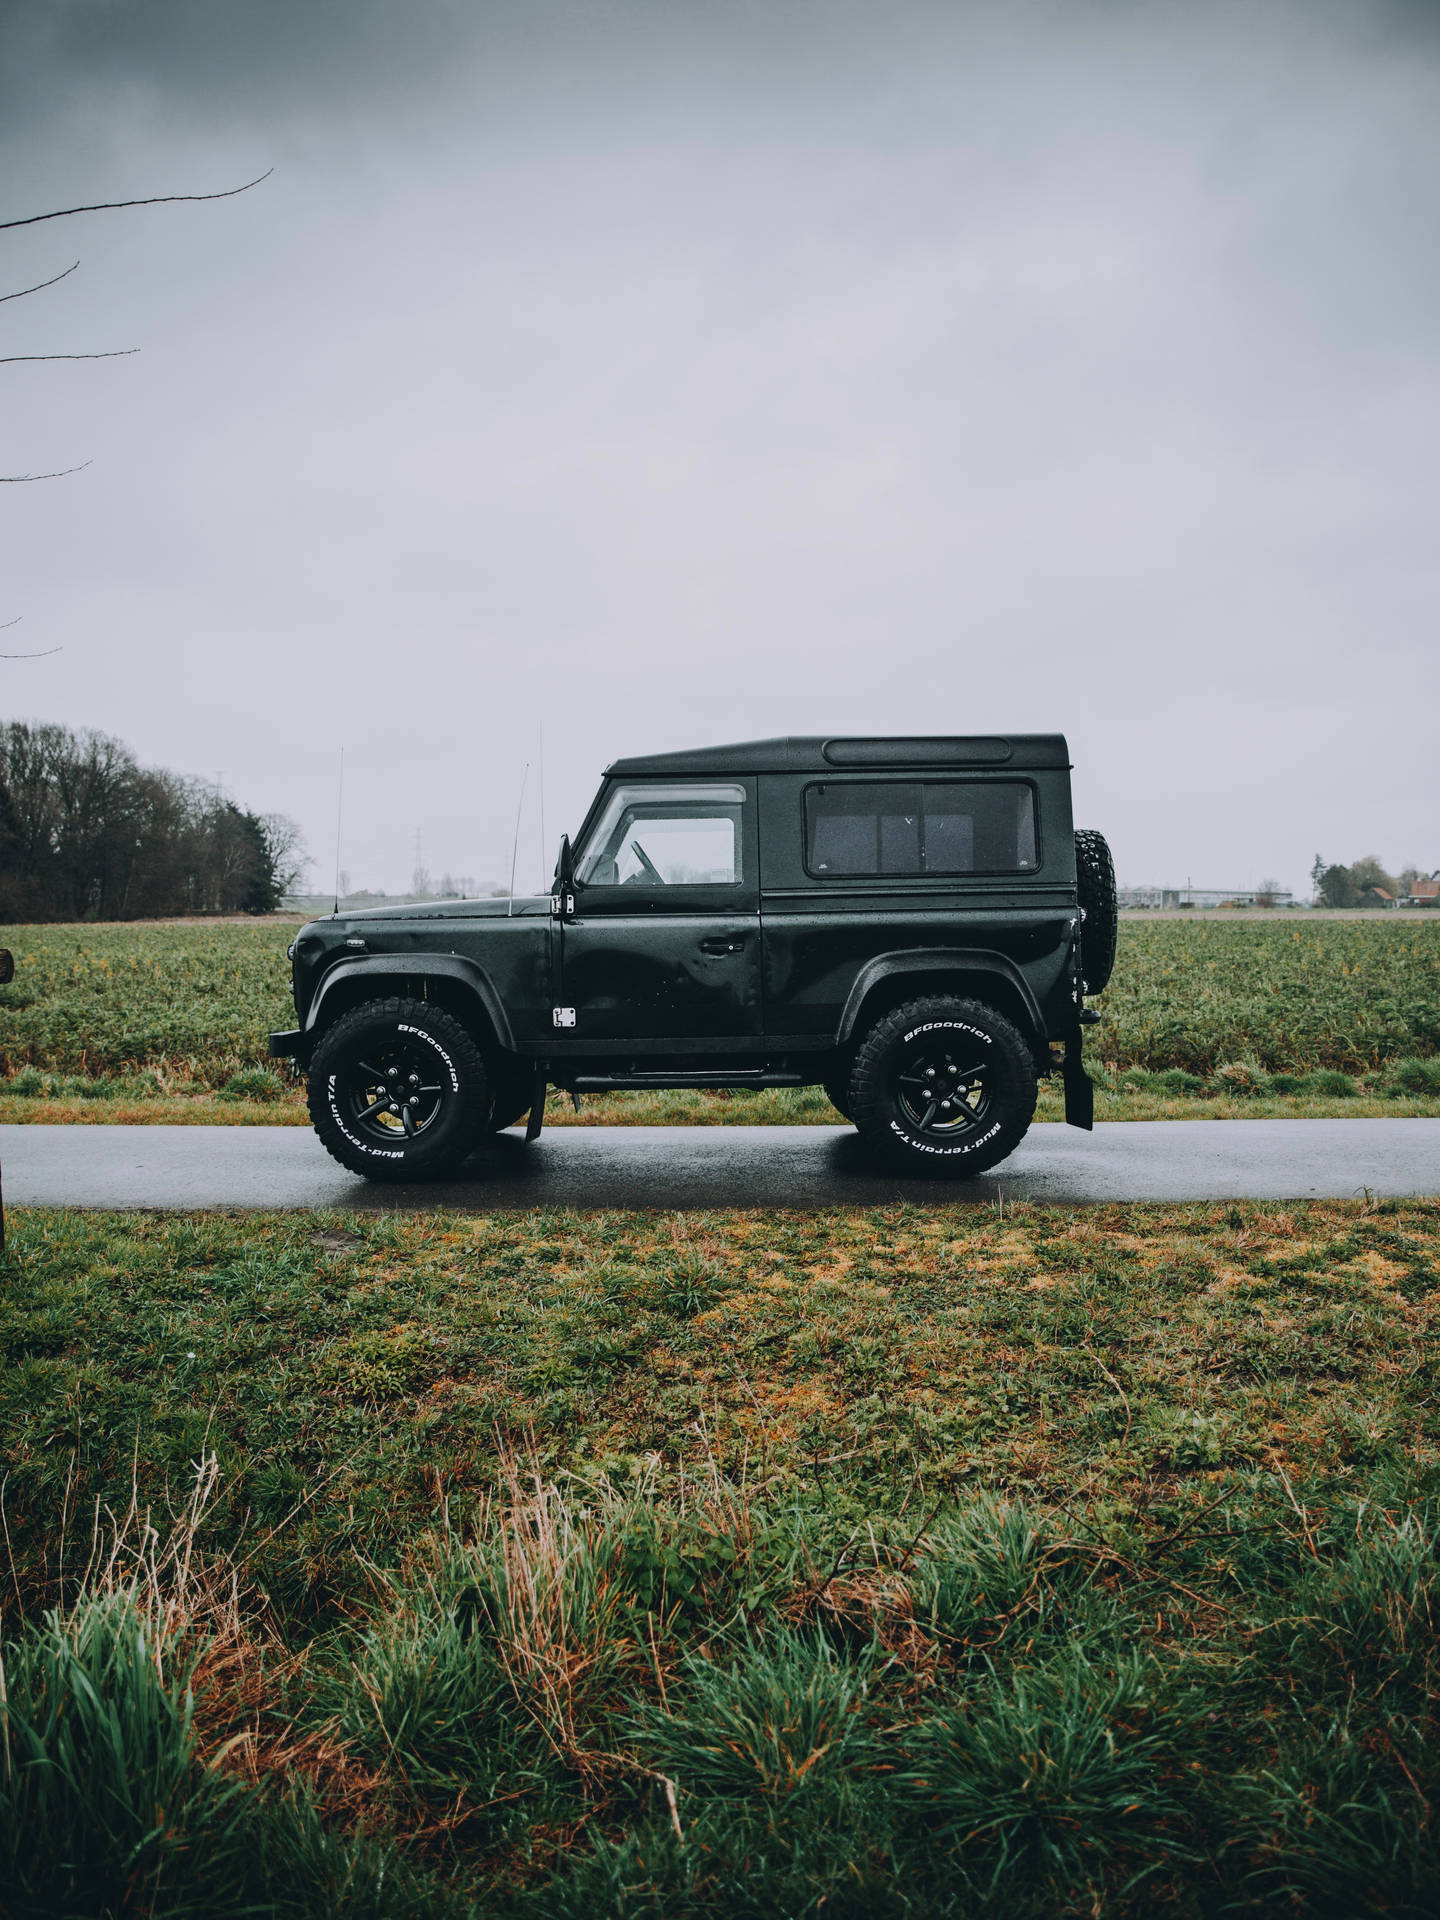 Get On The Road With The Classic Dark Green Land Rover Wallpaper